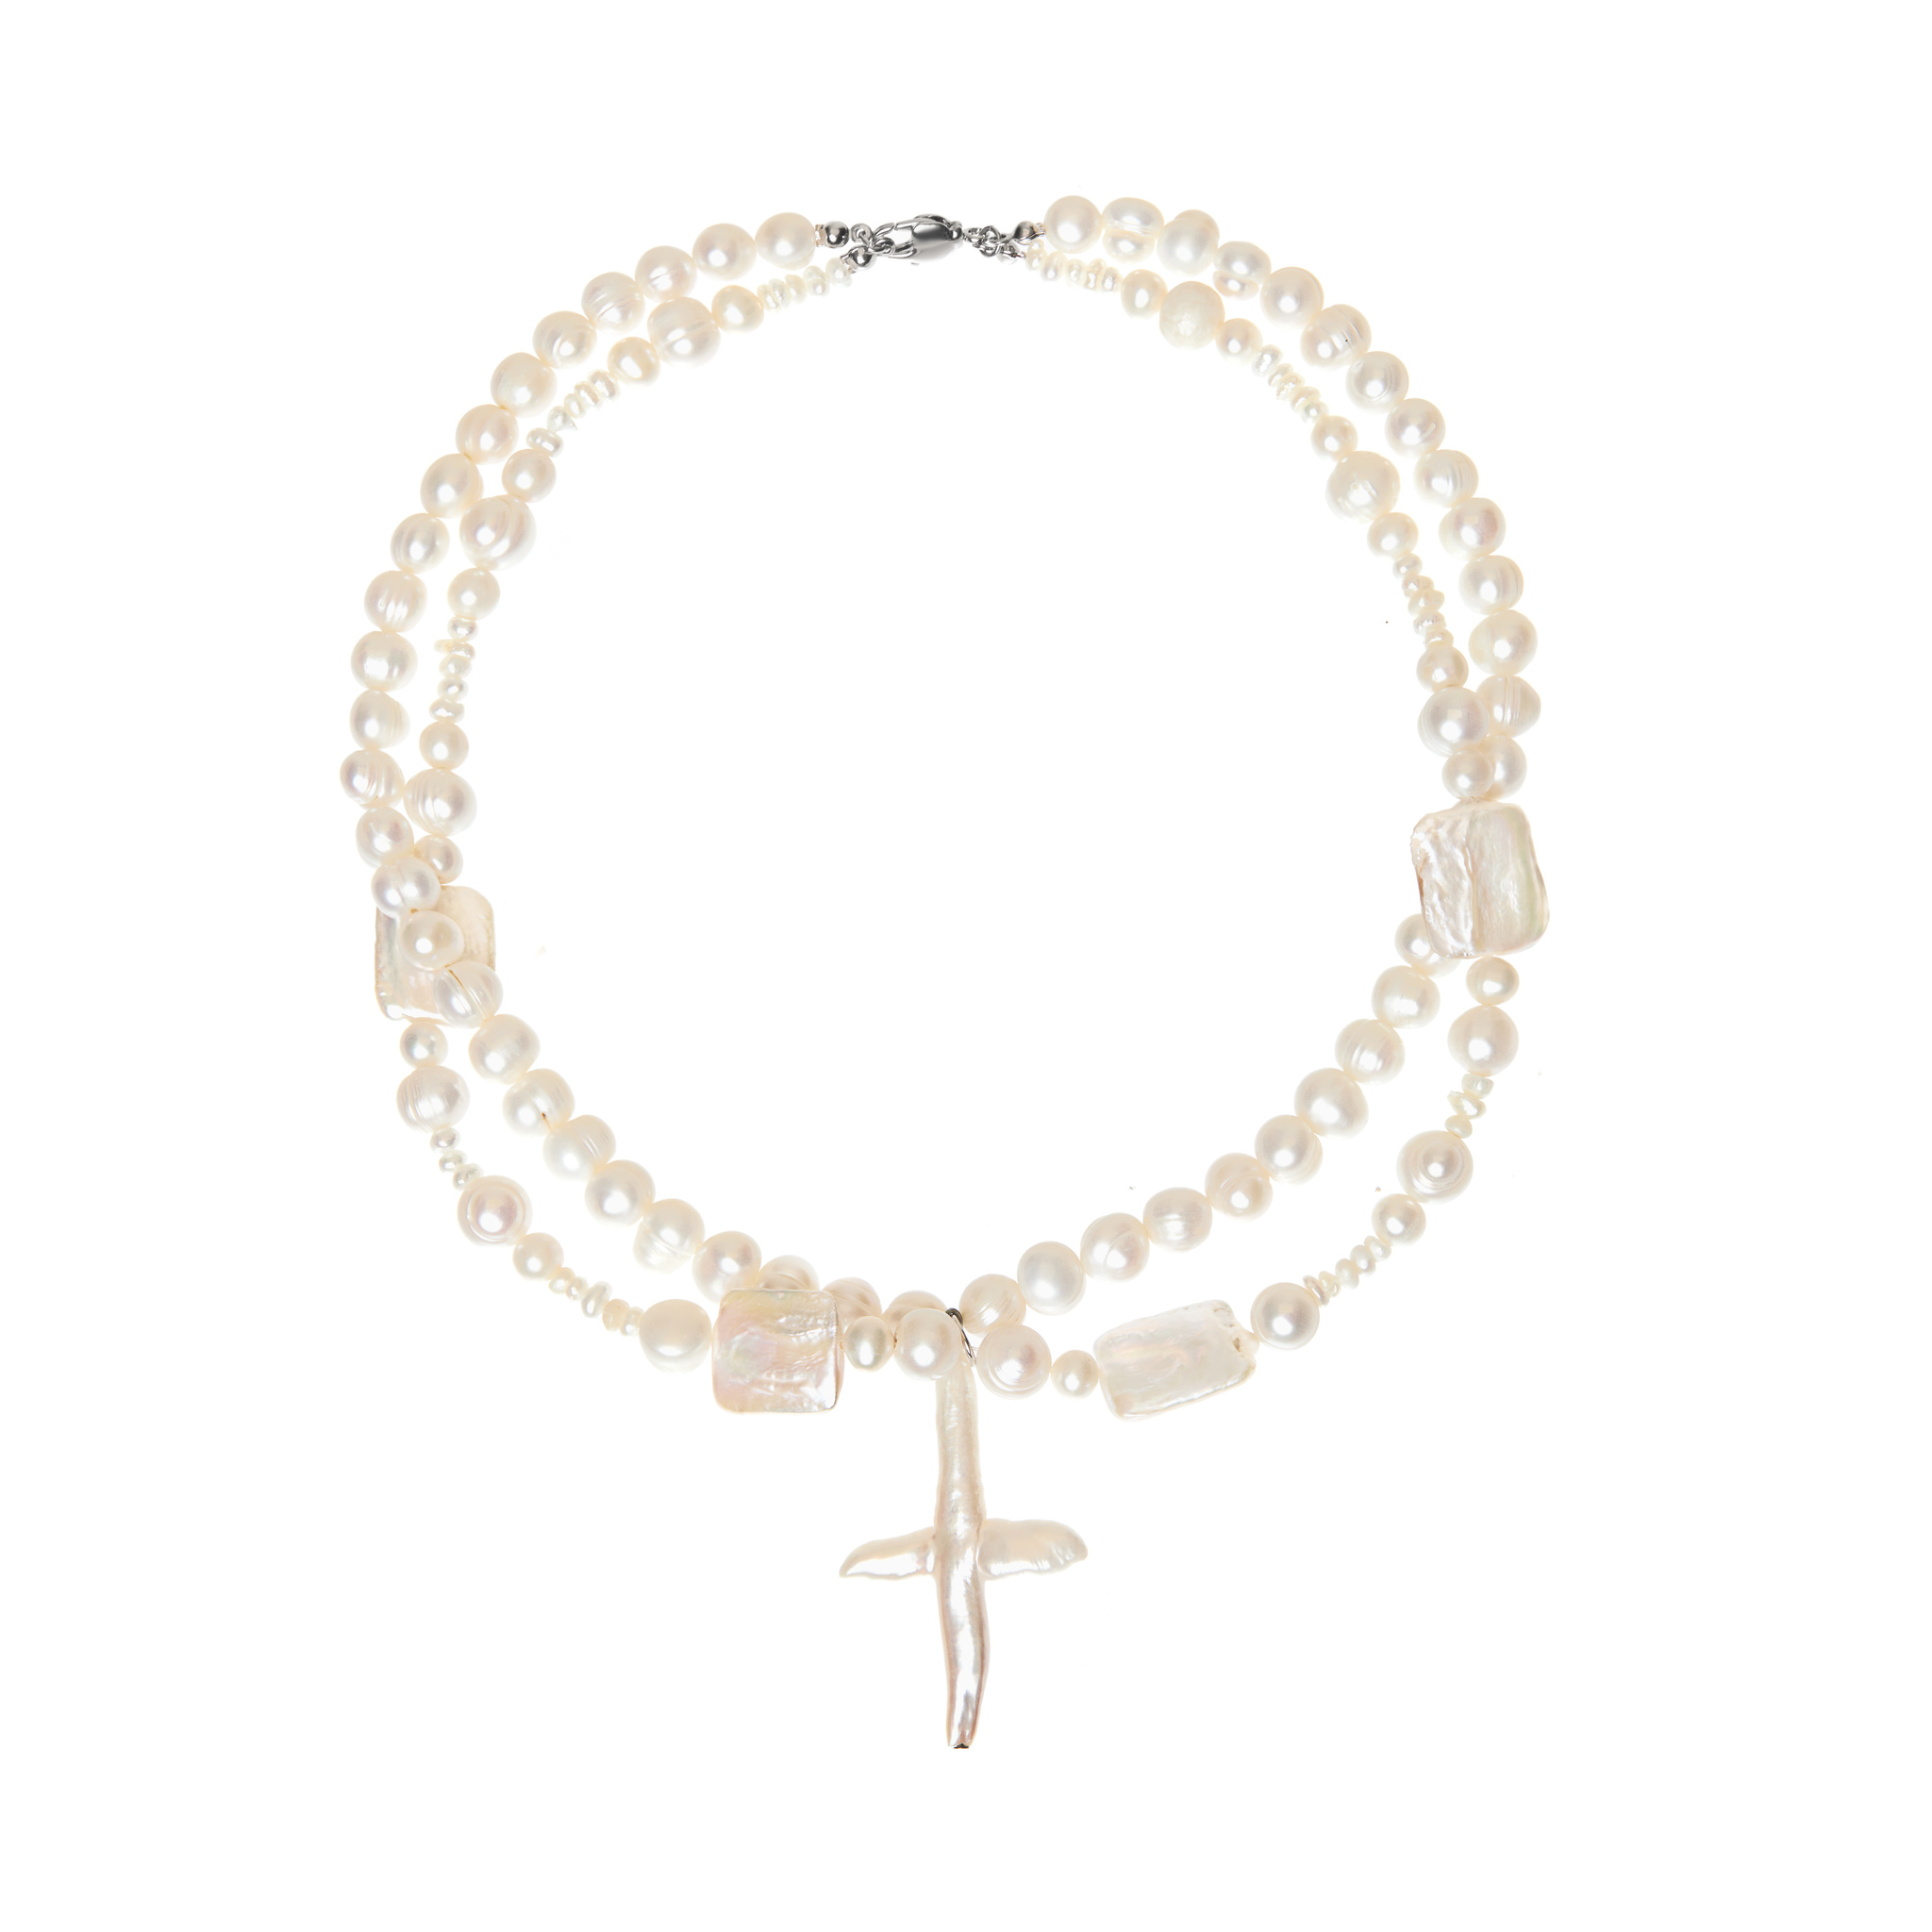 HOLLY JUNE Колье Pearly Abundance Cross Necklace – Nacre timeless pearly колье dancing queen necklace